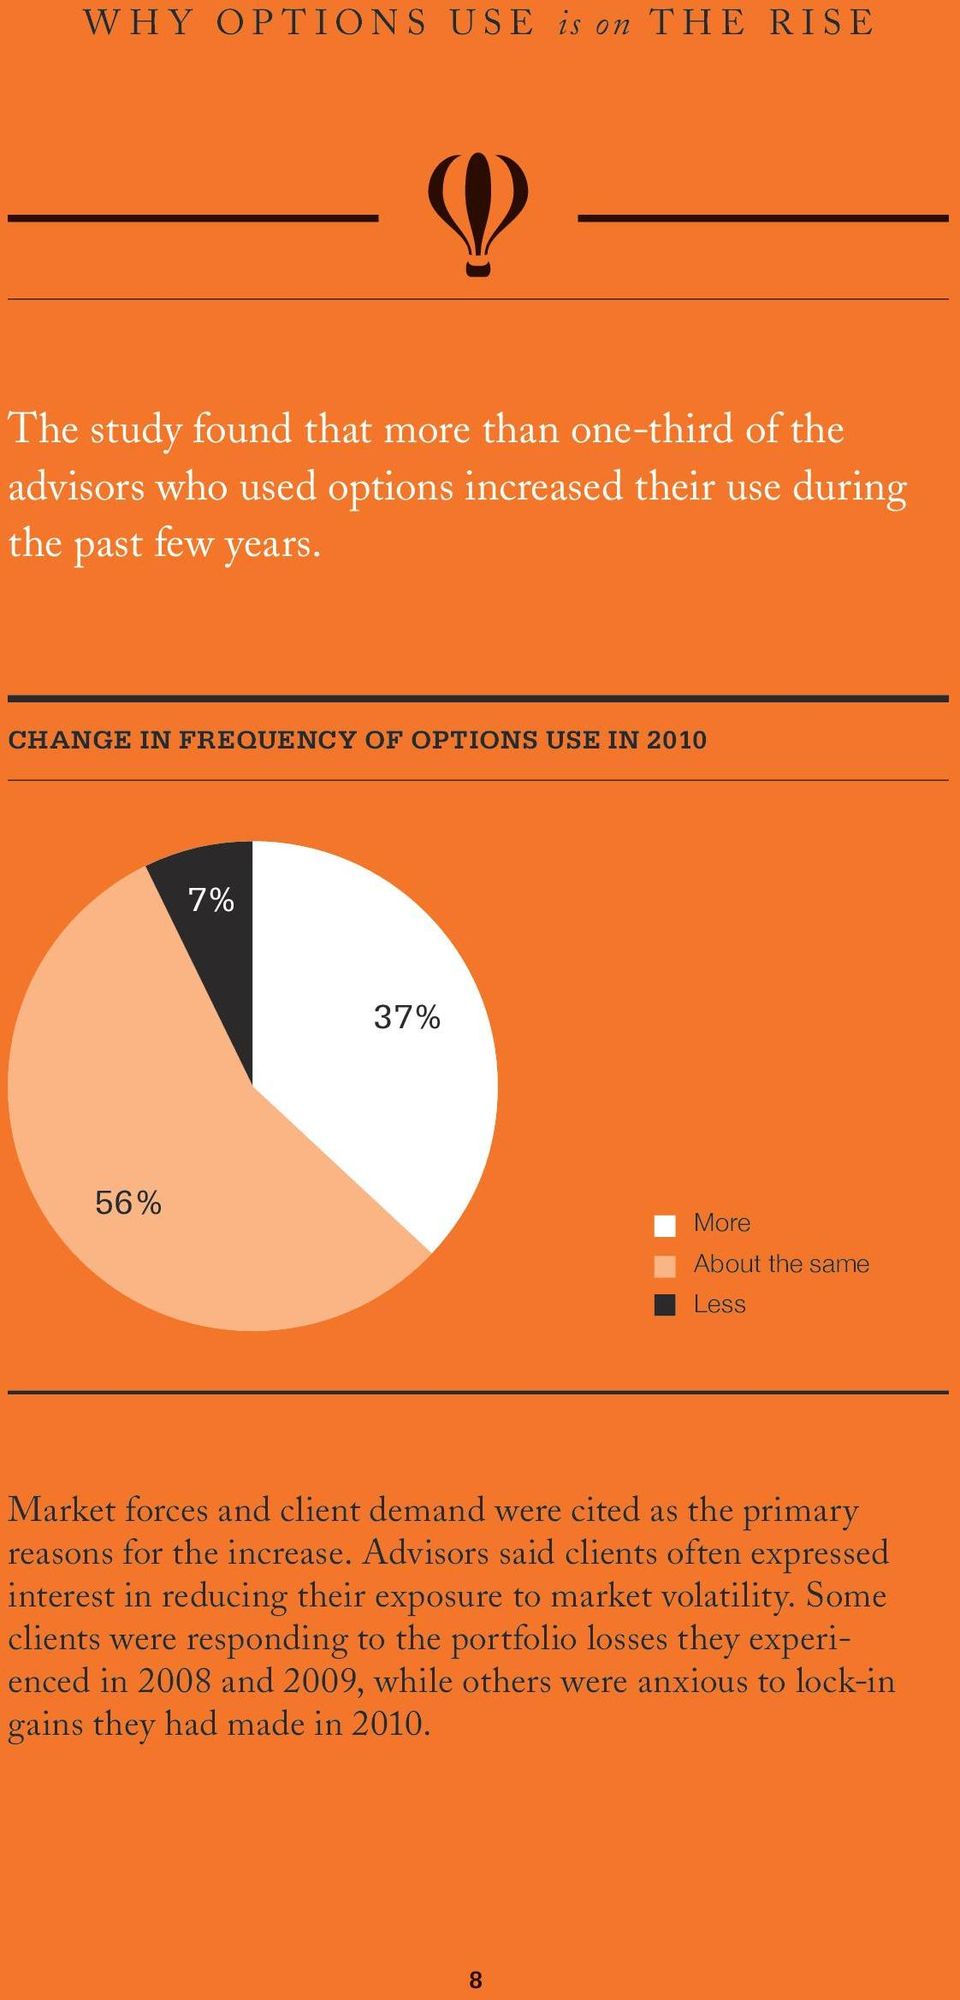 change in frequency of options use in 2010 7% 37% 56% More About the same Less Market forces and client demand were cited as the primary